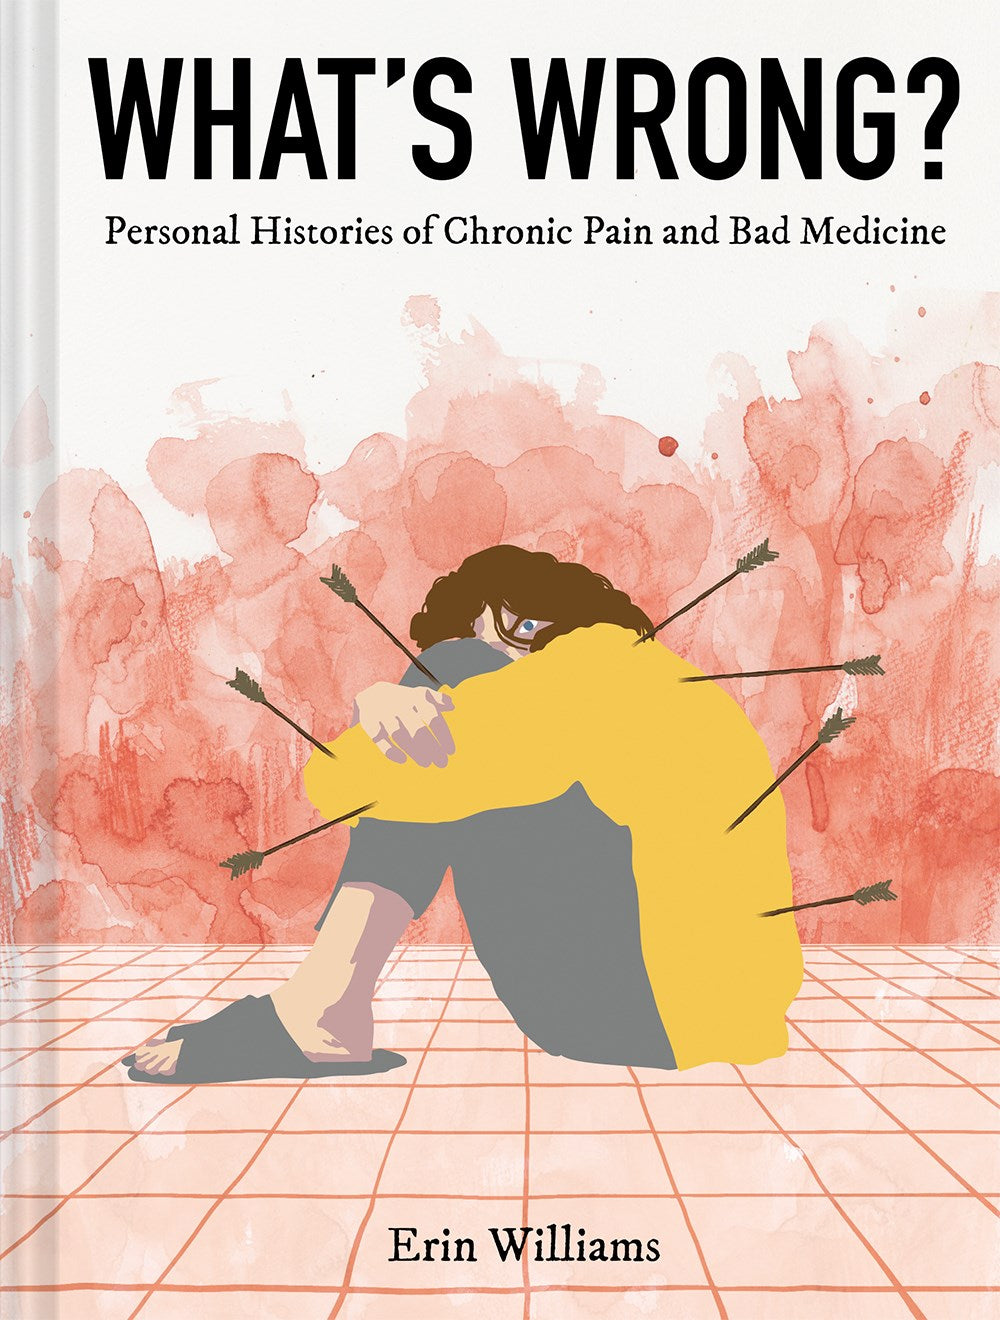 What's Wrong: Personal Histories of Chronic Pain and Bad Medicine by Erin Williams (1/23/24)